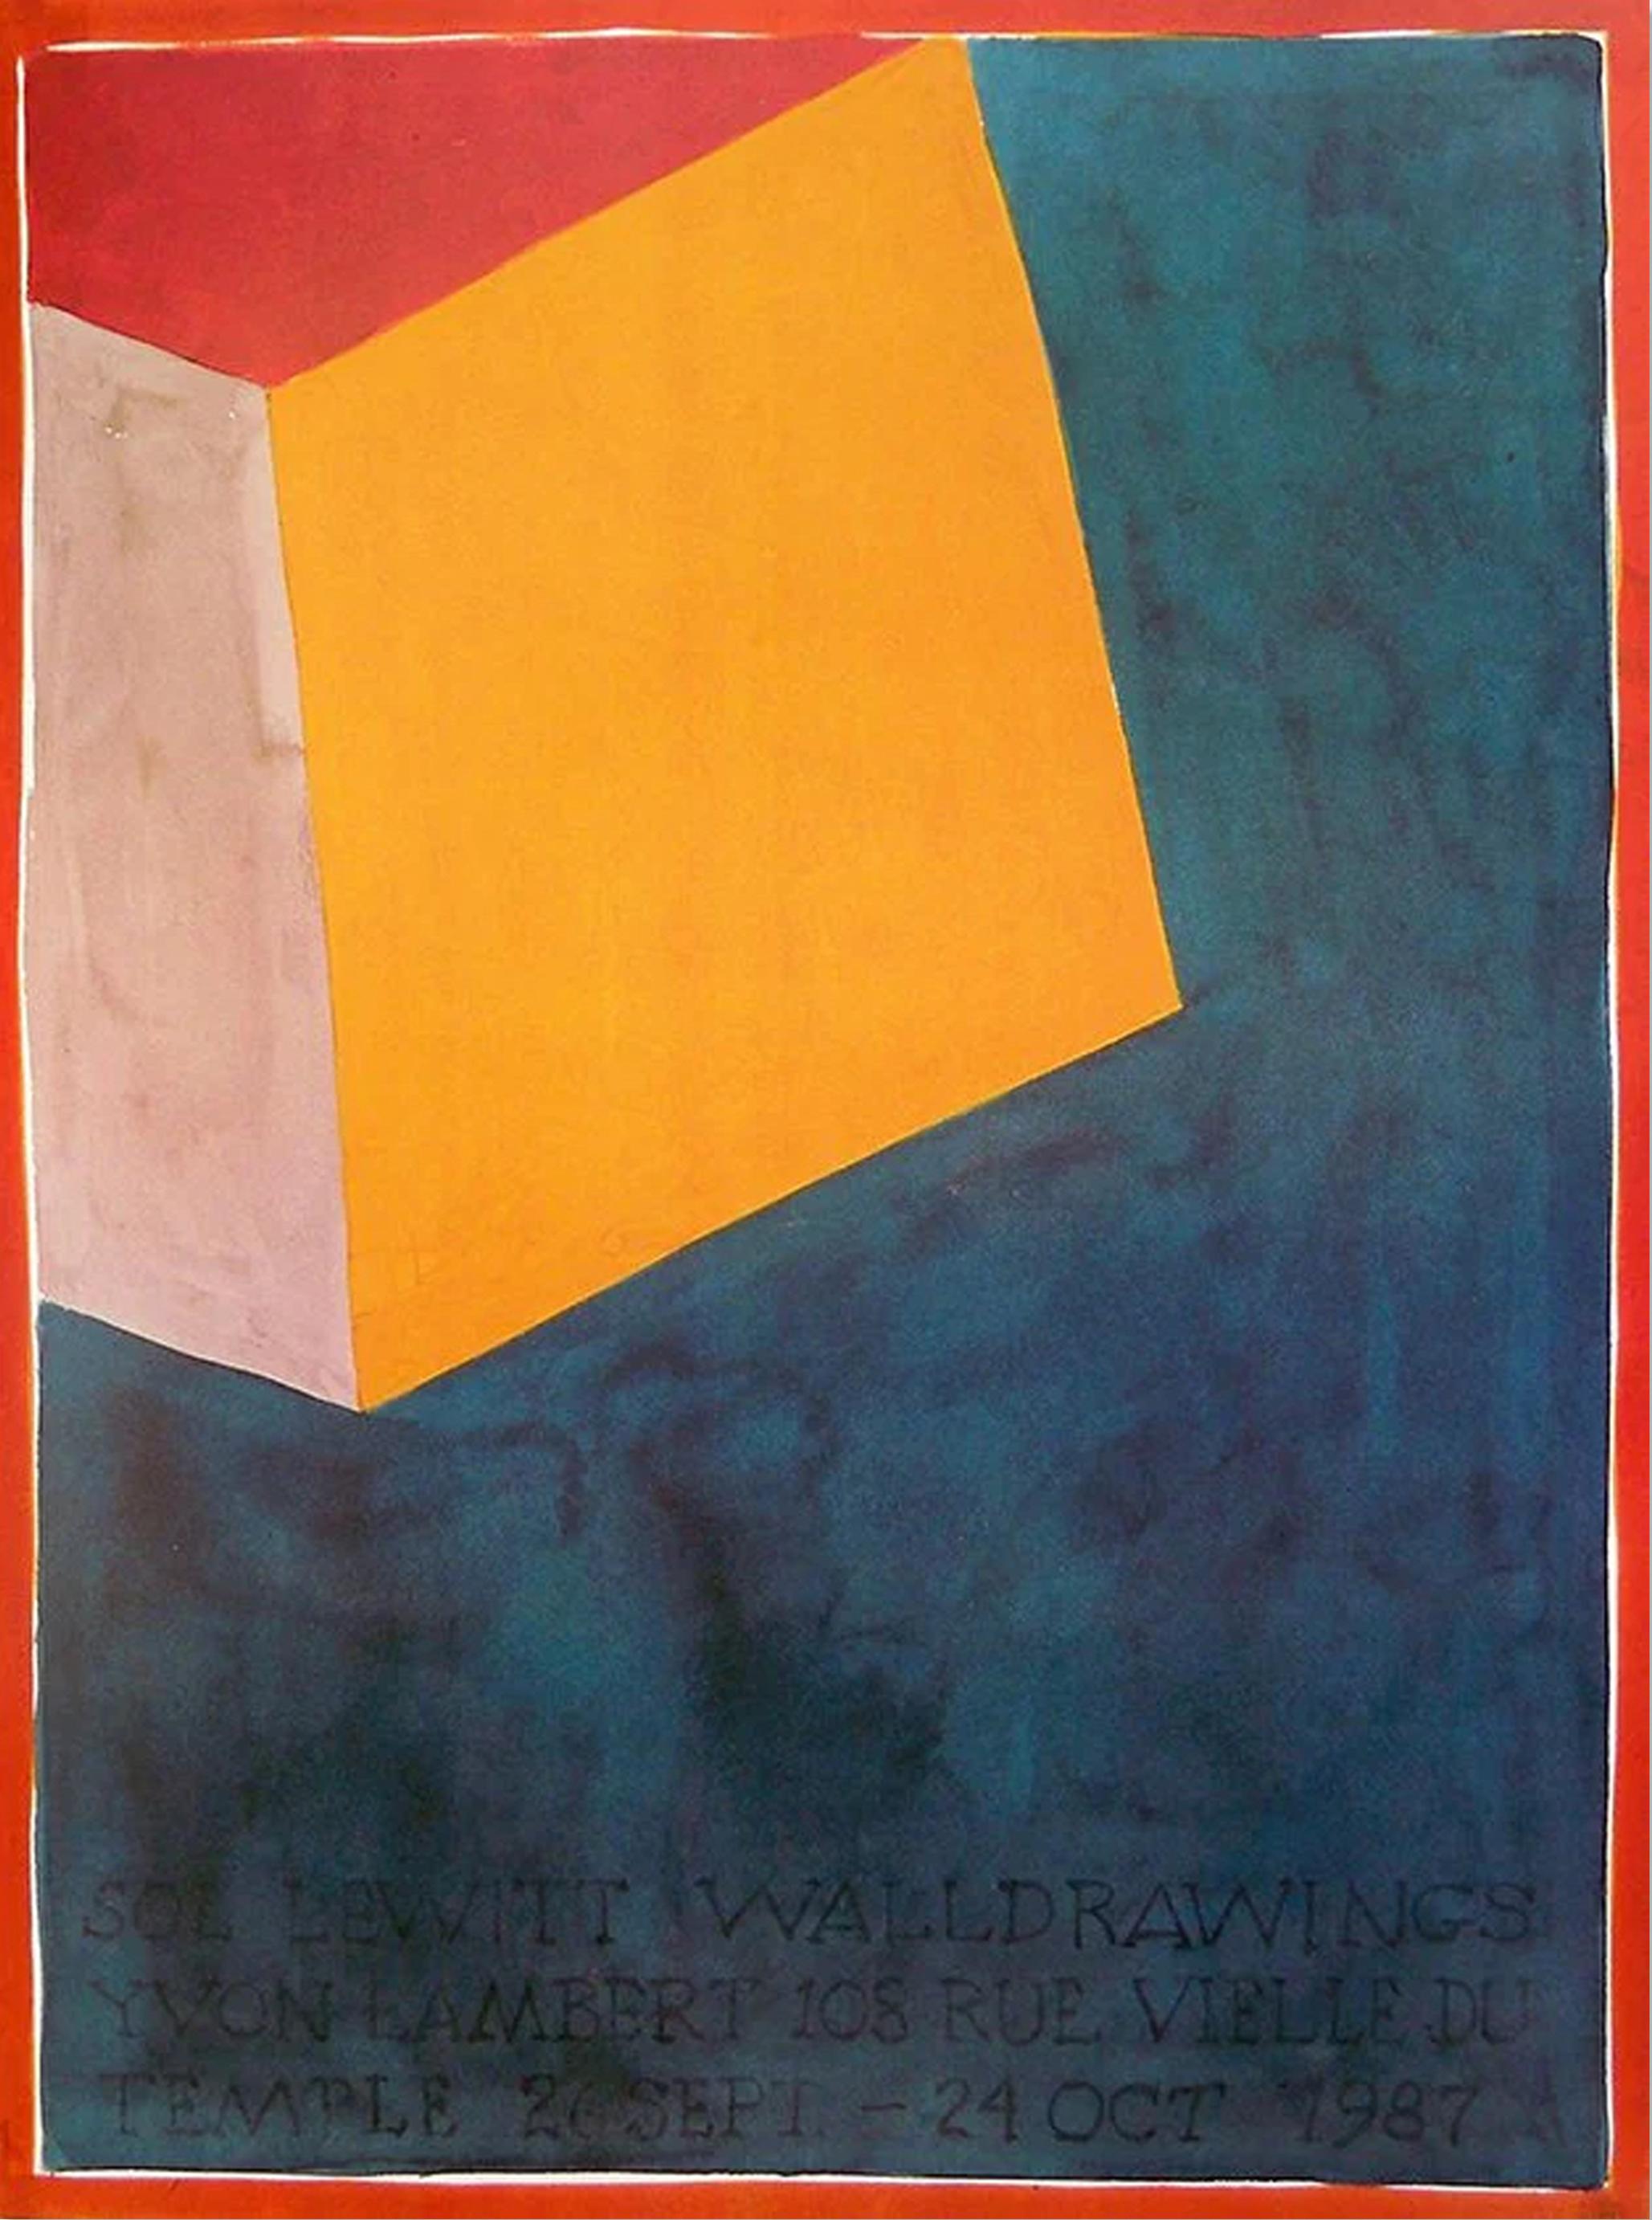 Sol Lewitt, Wall Drawings Exhibition at Yvon Lambert Paris, 1987 Exhibition Post - Art by (after) Sol LeWitt